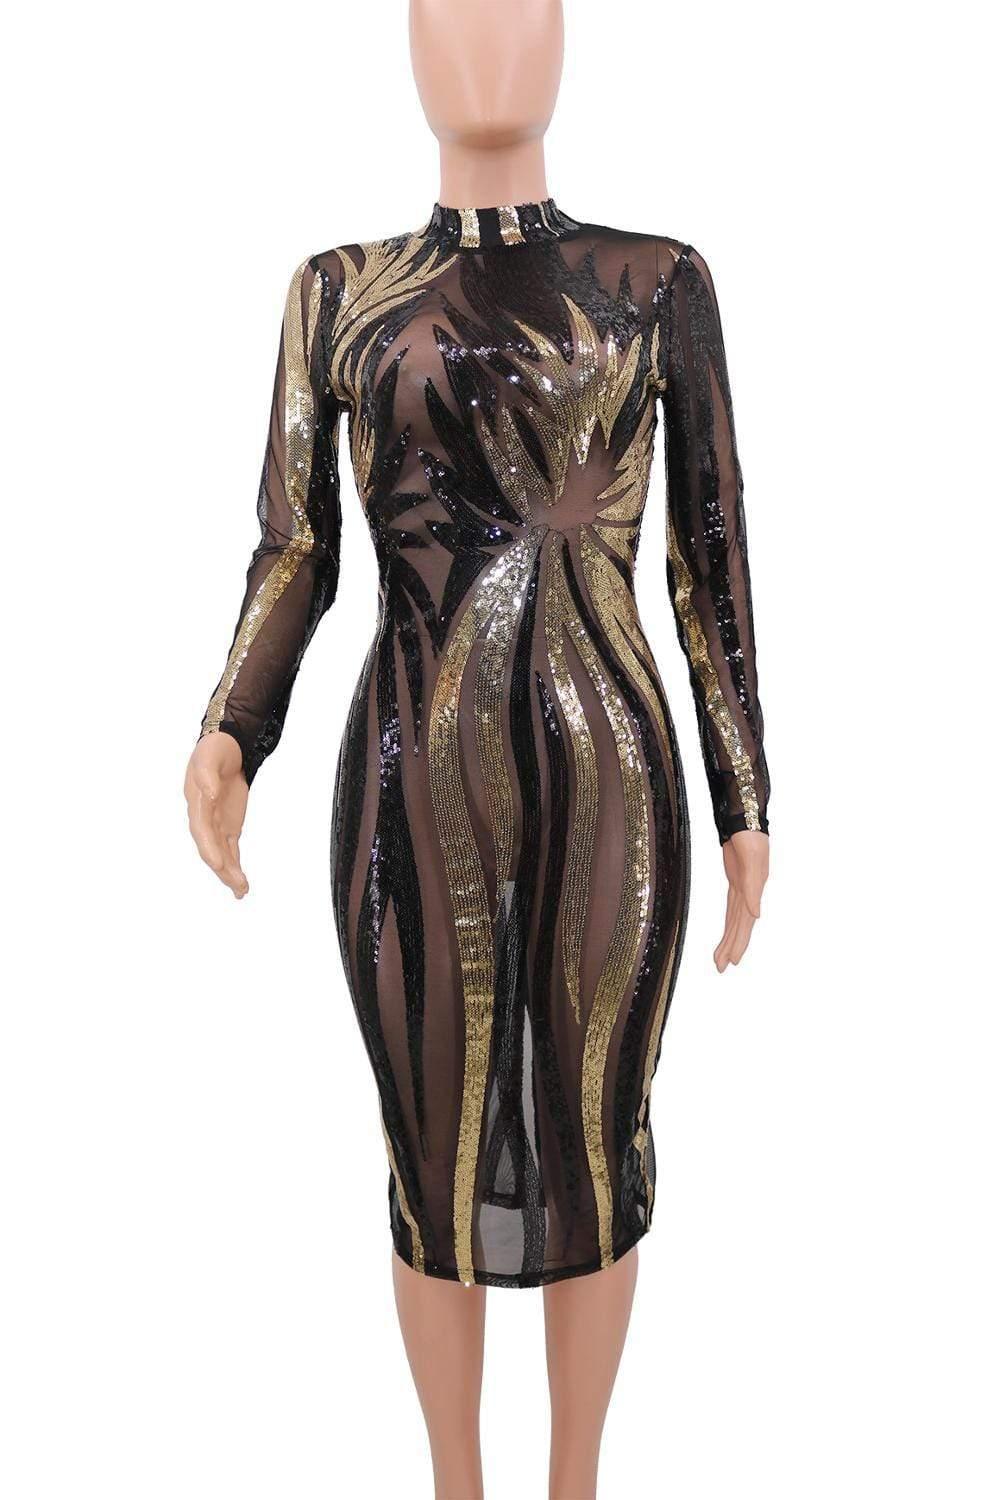 Sequin Night Club Party Midi Dress - For Women USA